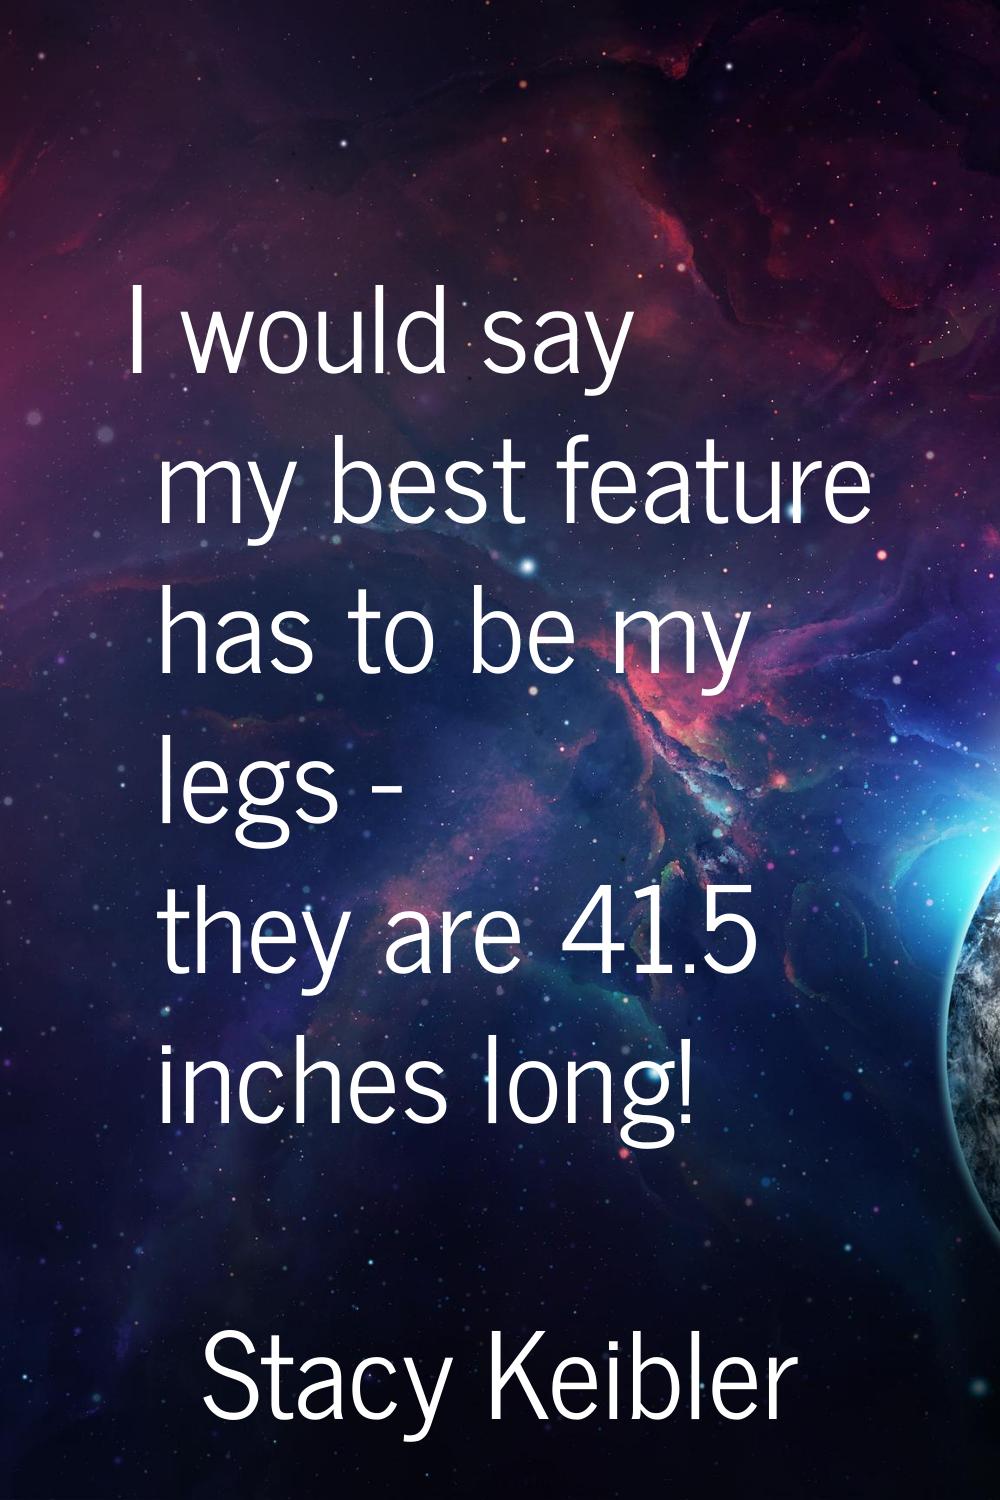 I would say my best feature has to be my legs - they are 41.5 inches long!